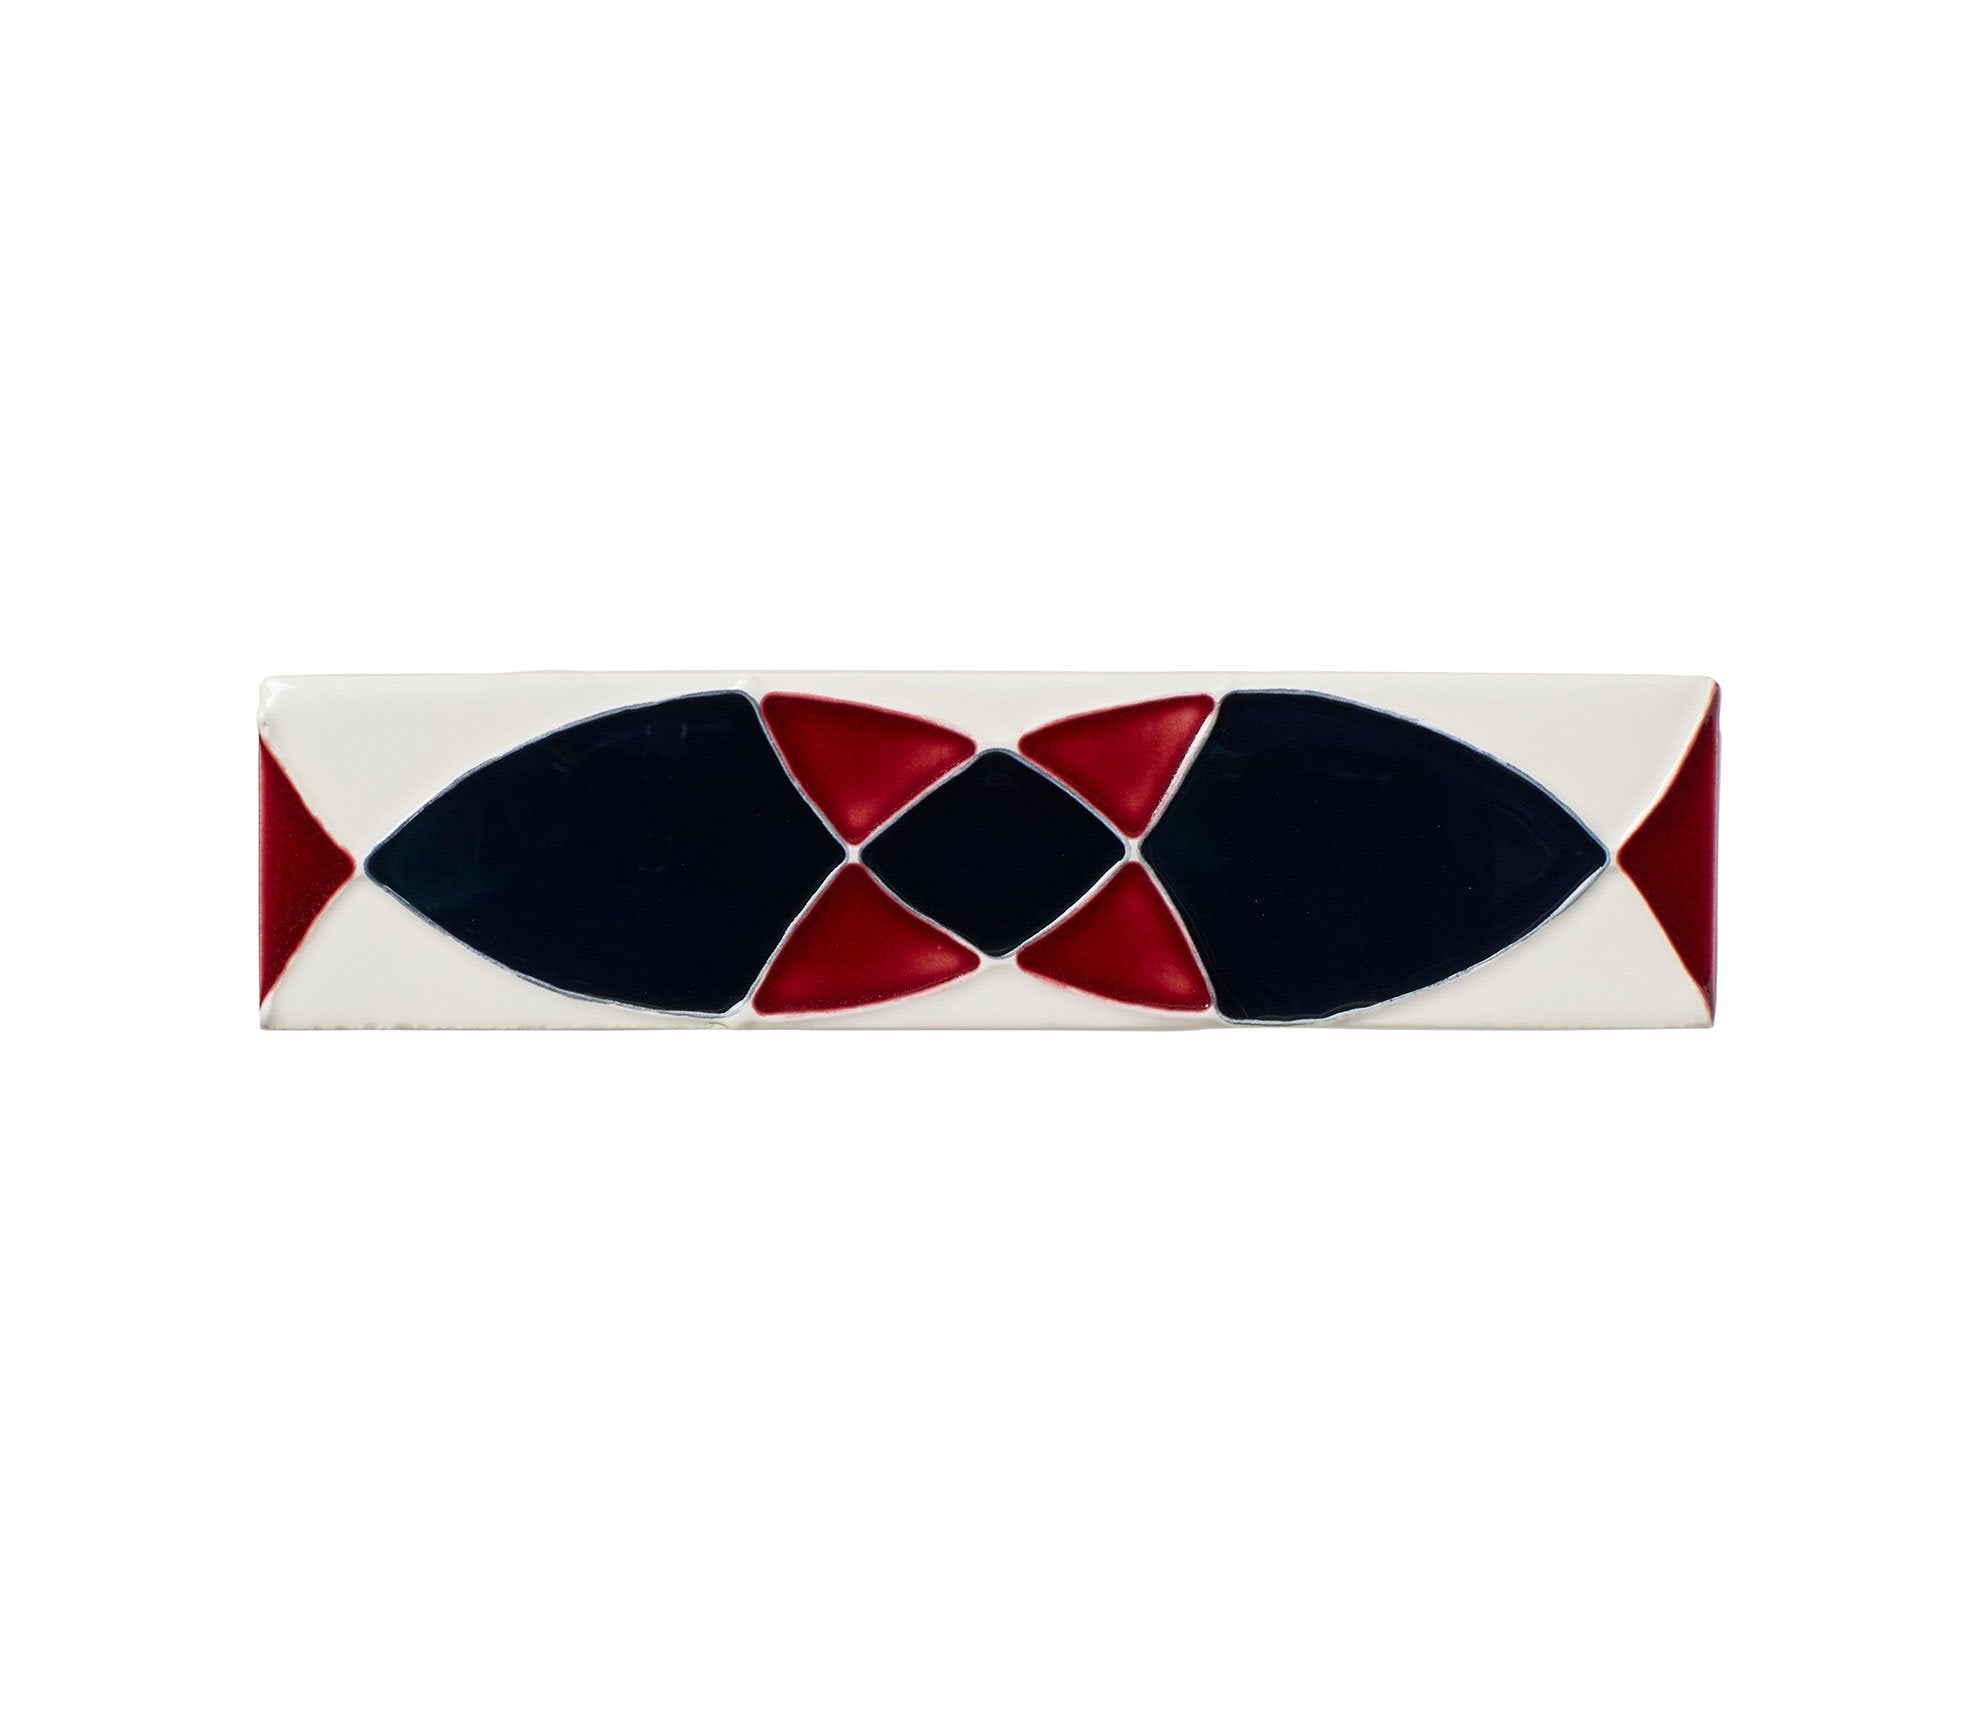 Hanley Tube Lined Decorative Tiles Product Image 40